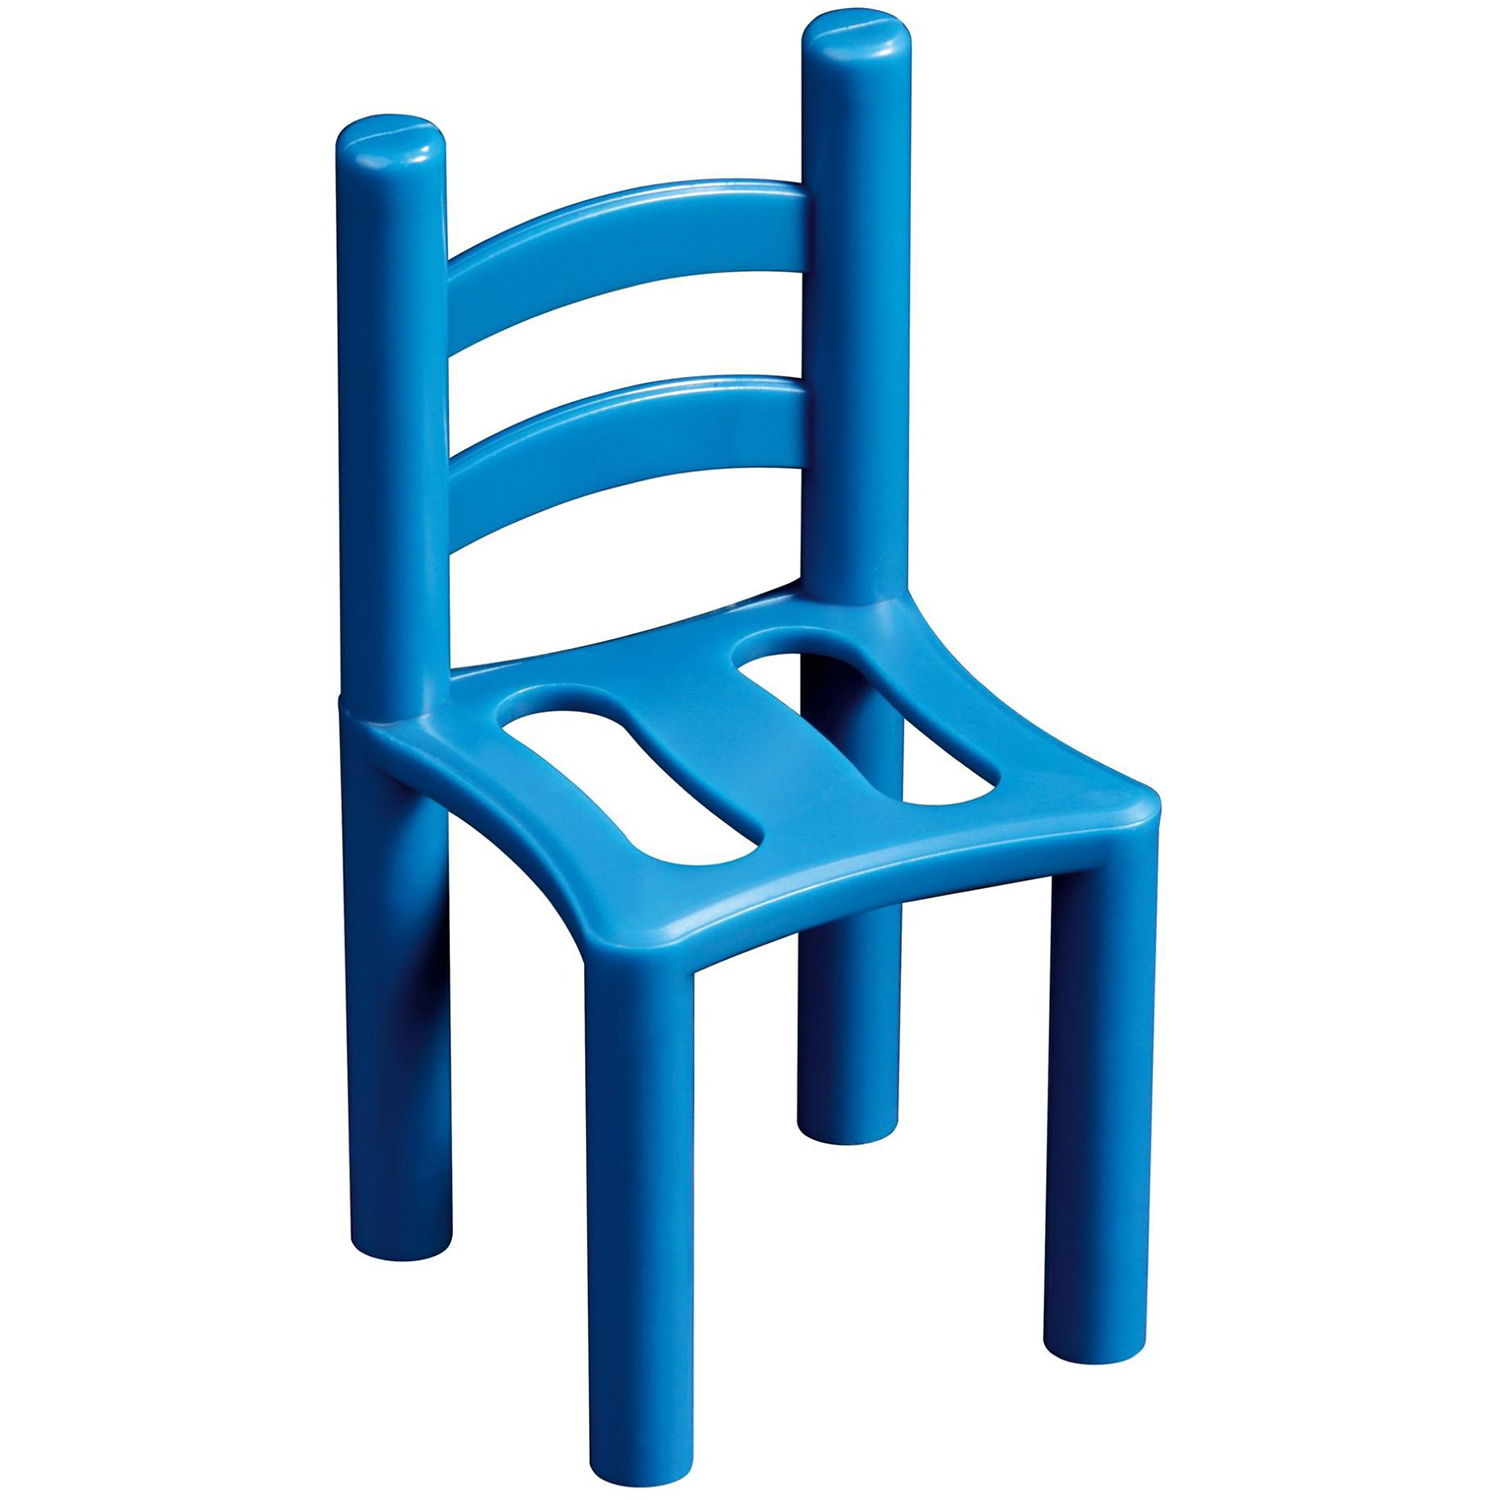 Philos Chair on Chair stacking game 38x38 mm